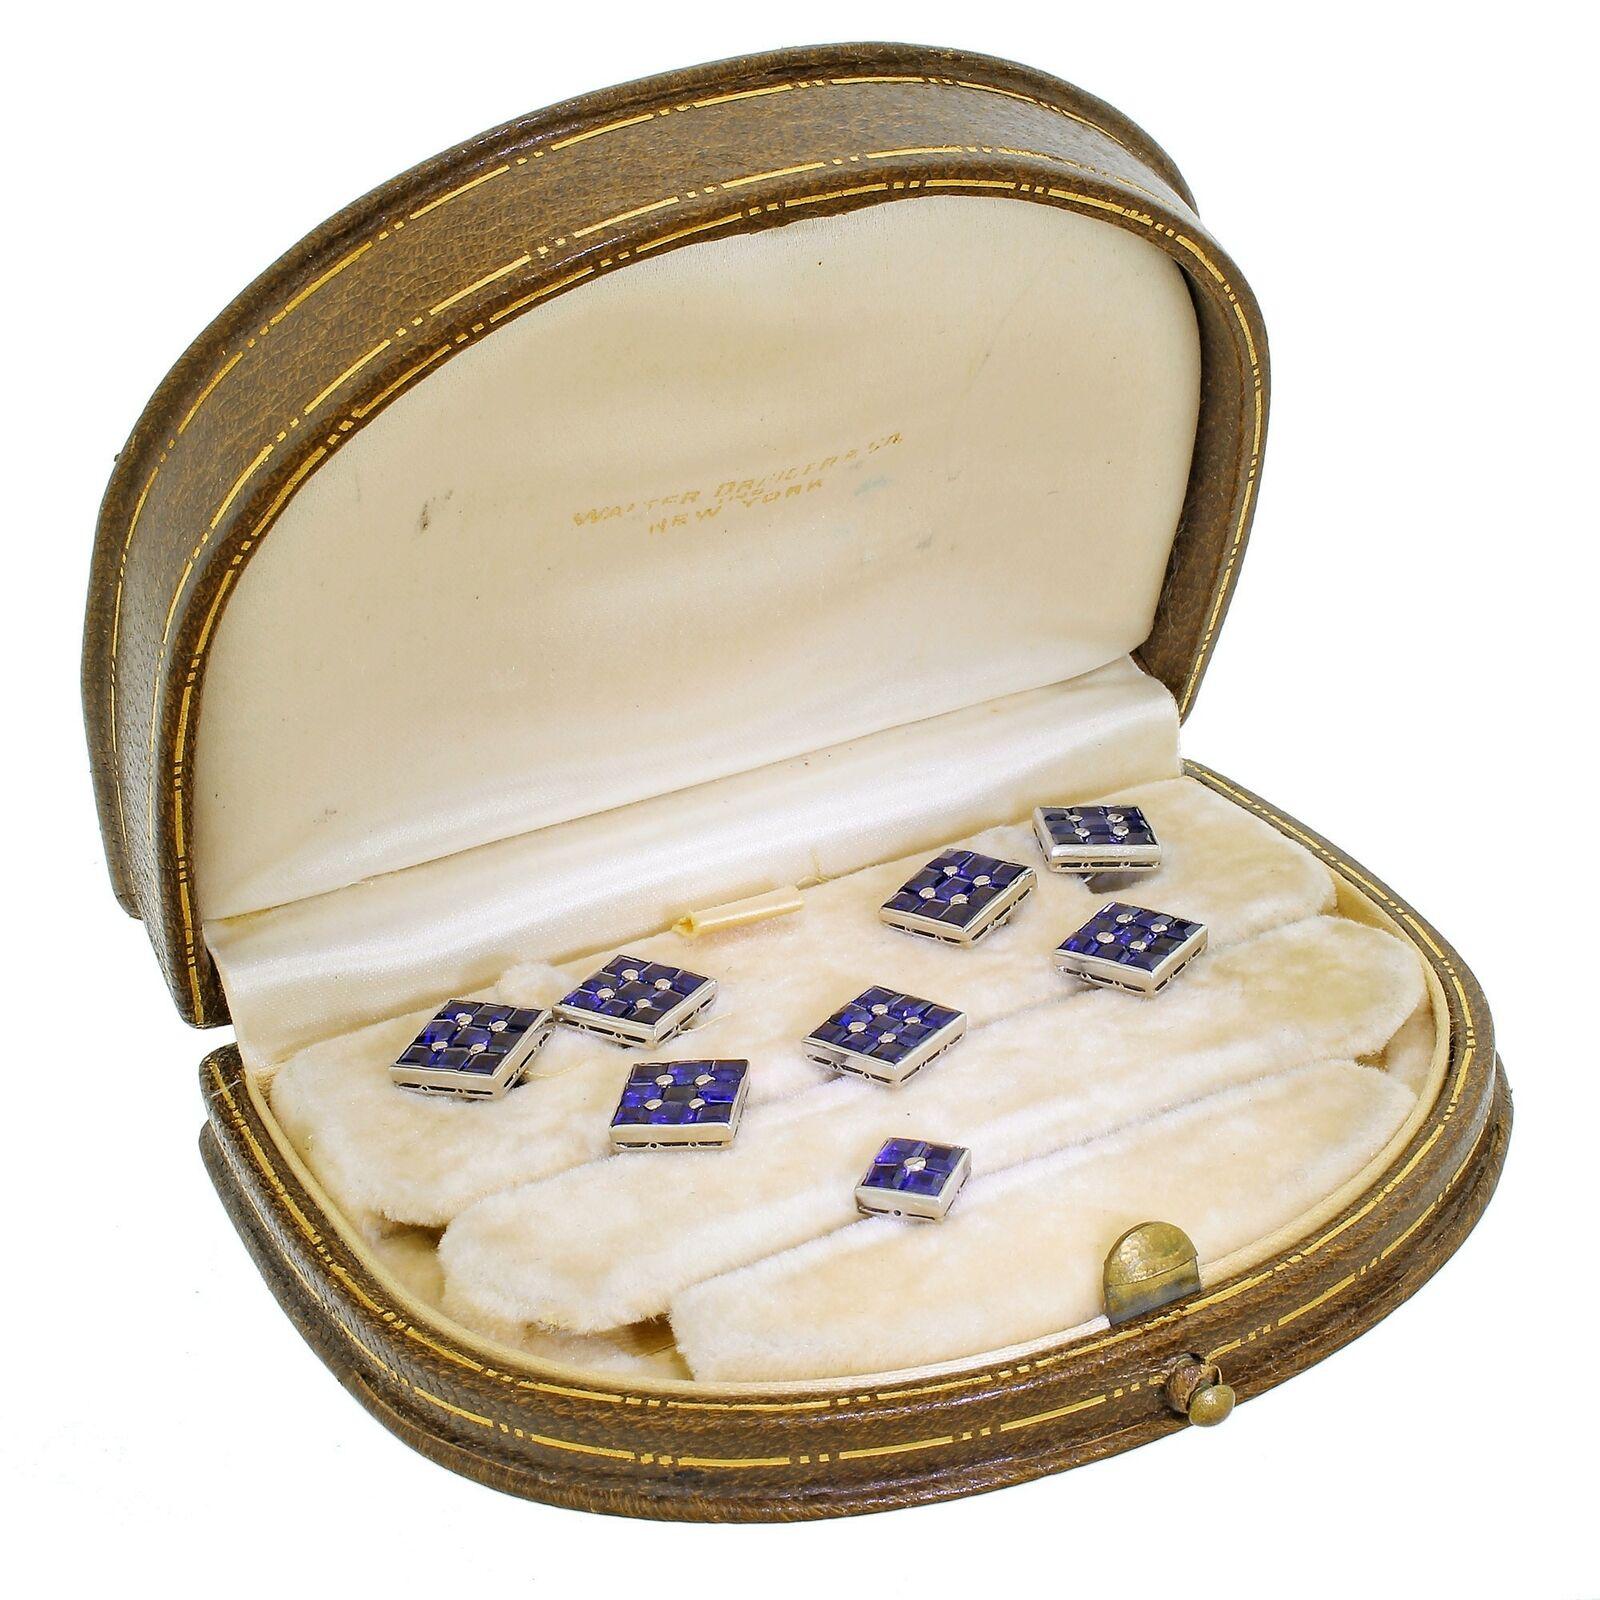 Fine quality, high-style Art Deco Men's Platinum & 18K white gold cufflinks and shirt set. The workmanship is exquisite, with 65 perfectly matched vivid royal blue sapphire gemstones, invisibly set into platinum, with 18K white gold hardware. There